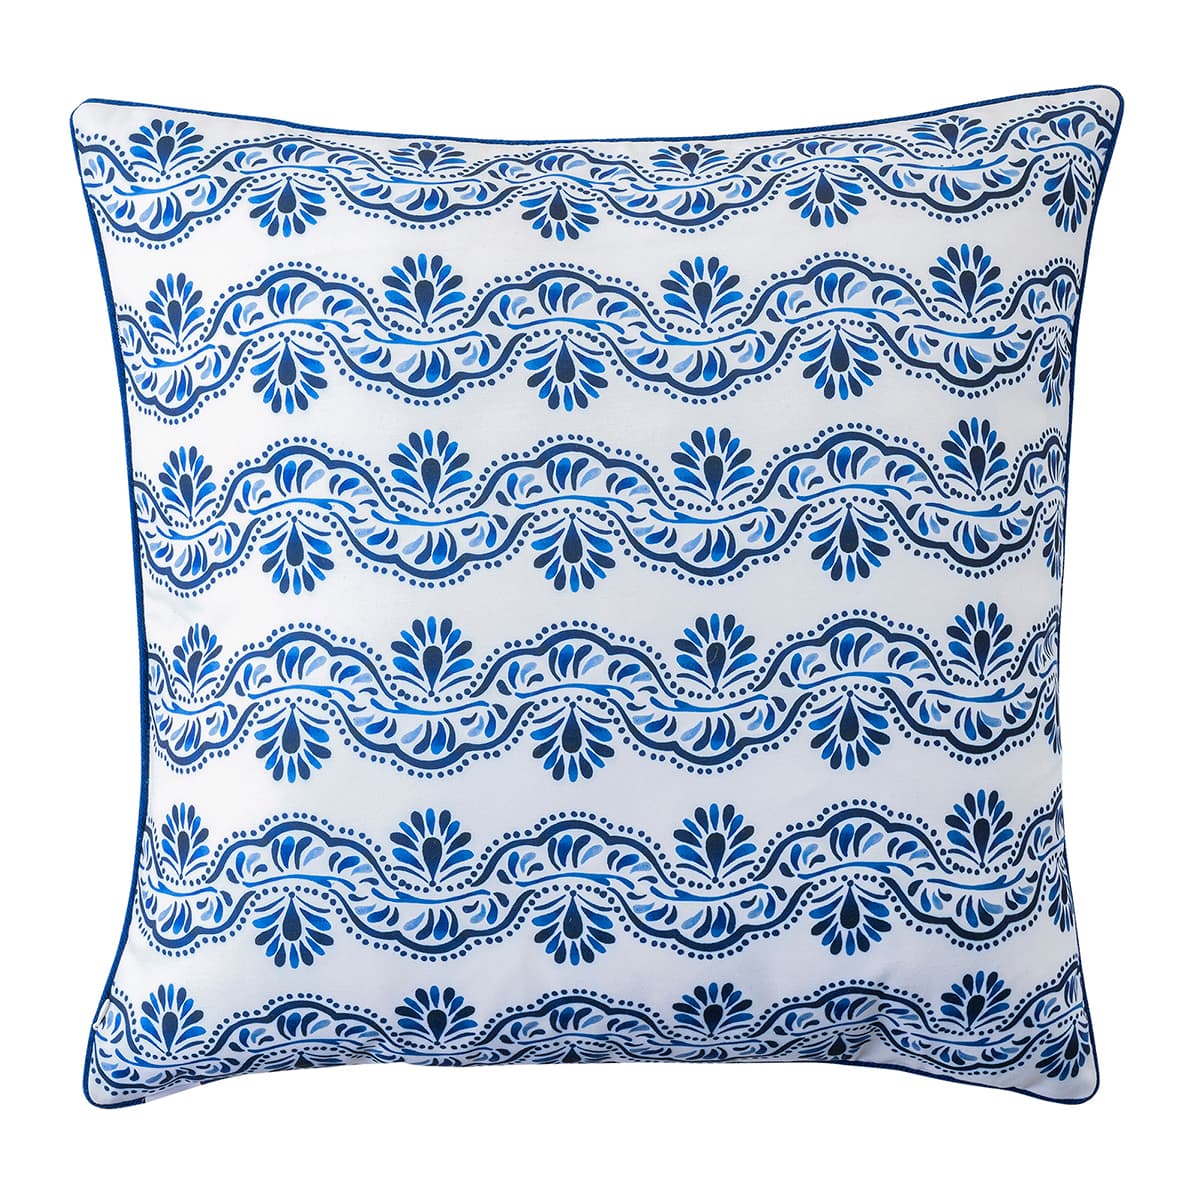 Printed with inky hues of traditional Portuguese tiles and an all over motif as seen on our Iberian Journey dinnerware pieces, this pillow would make a happy addition to any room. Stuffed with 10% down and 90% feather fill.